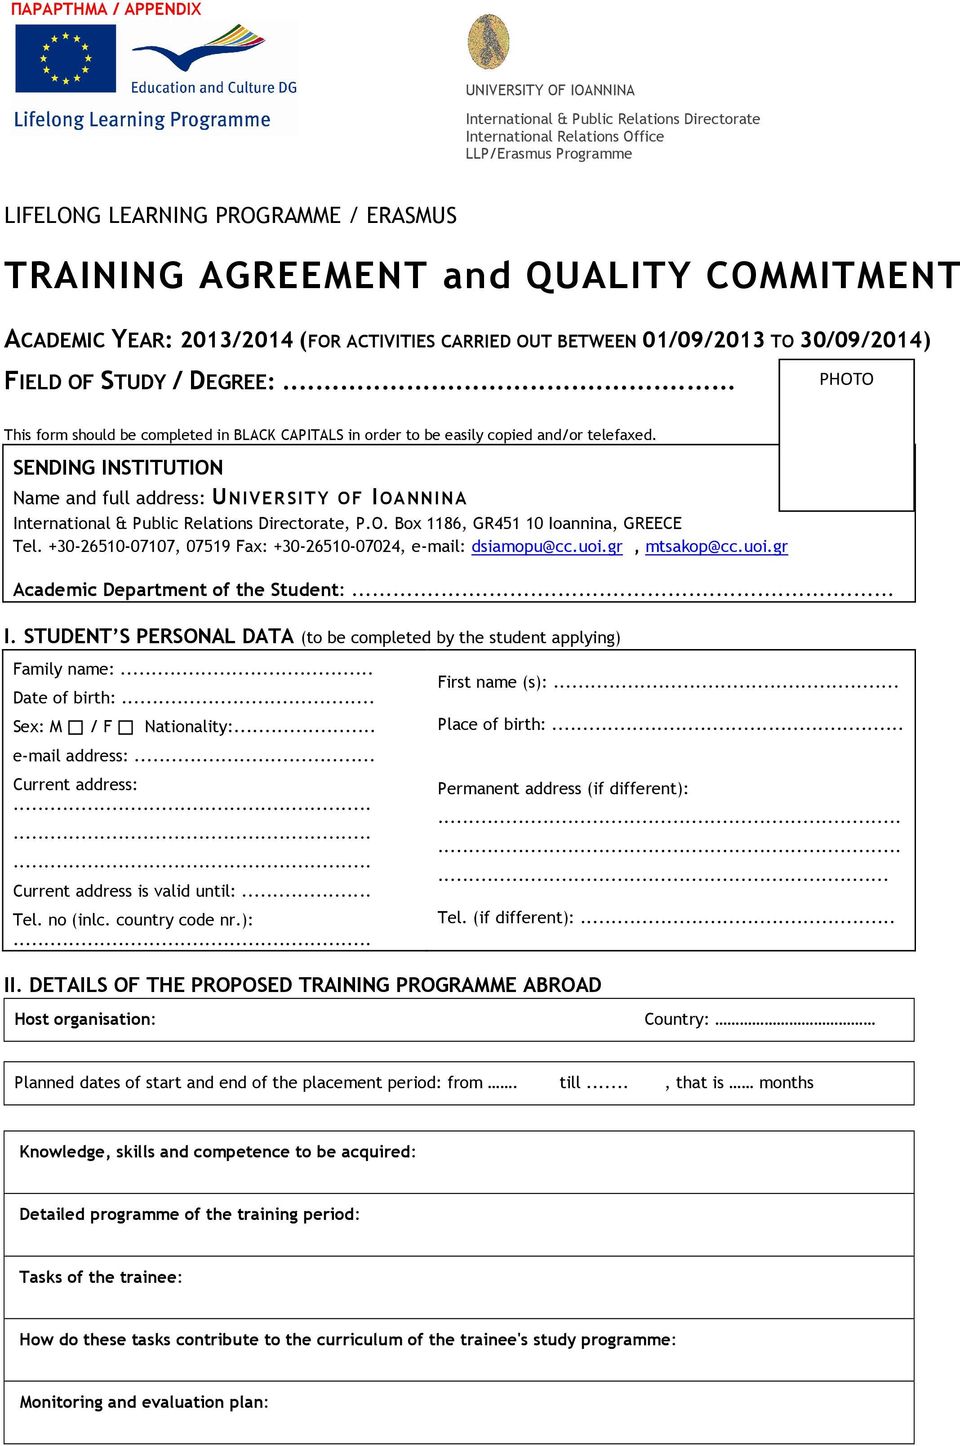 .. PHOTO This form should be completed in BLACK CAPITALS in order to be easily copied and/or telefaxed.